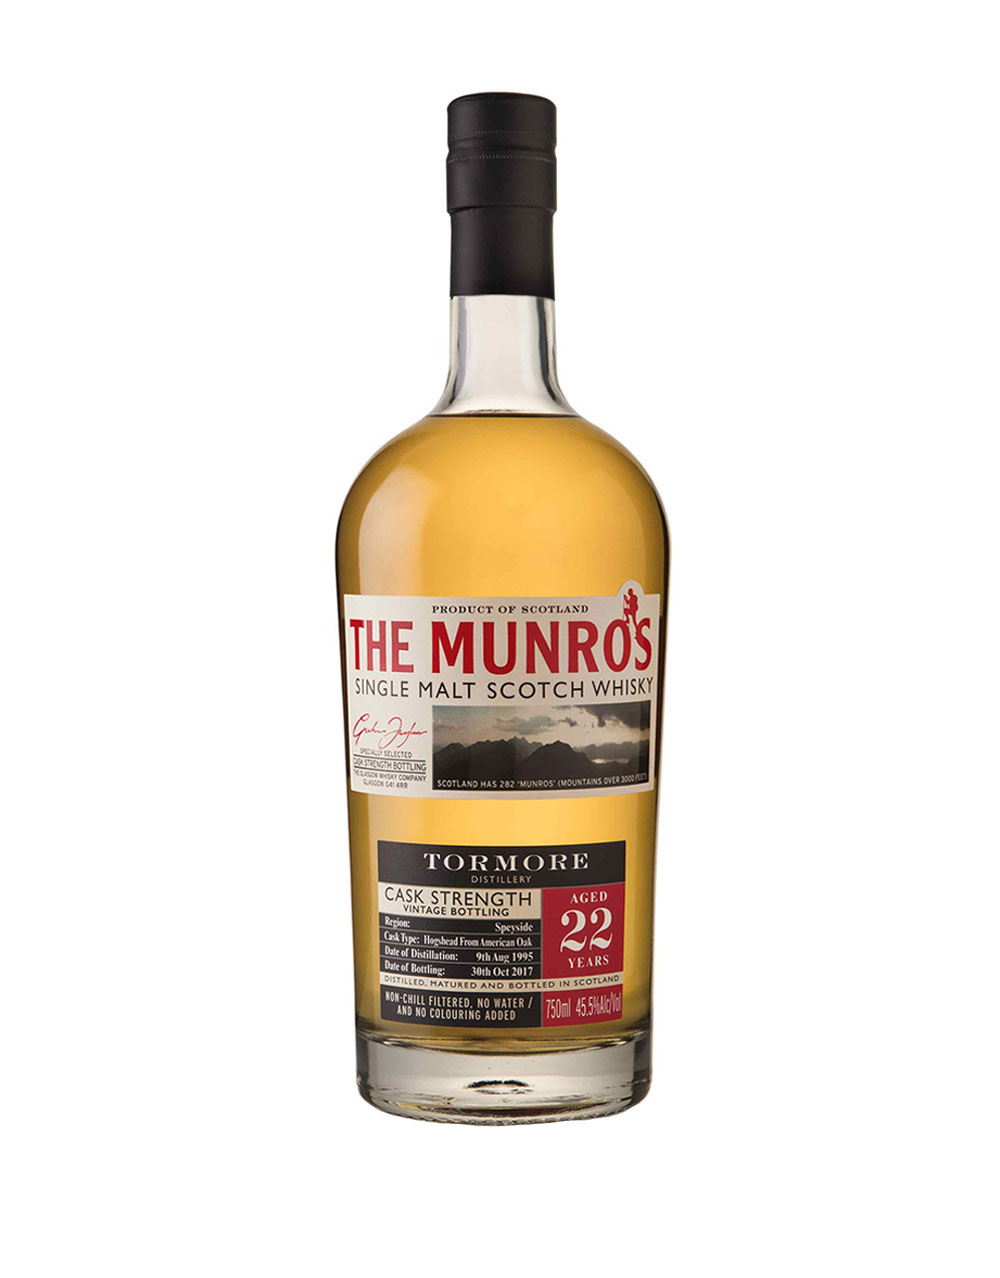 The Munros Tormore Cask Strength 22 Years